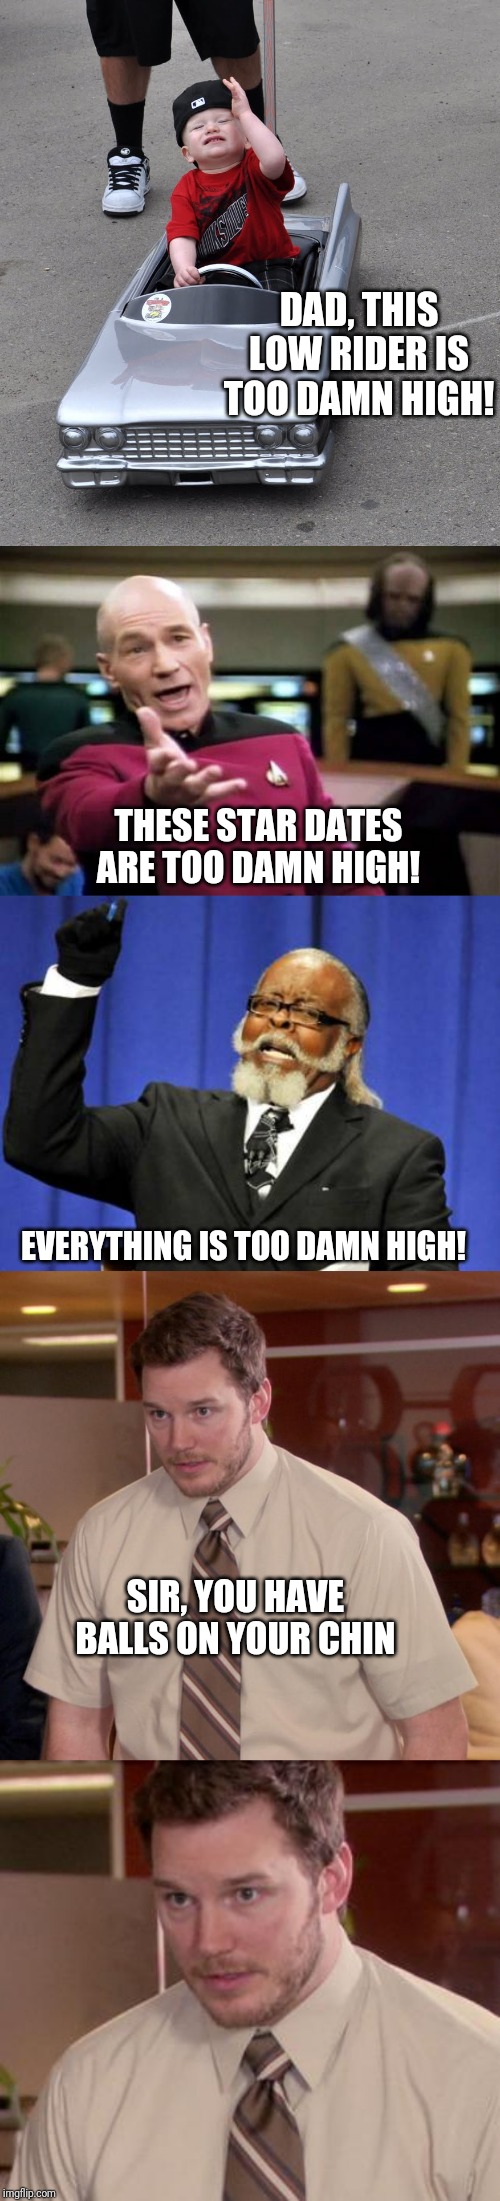 Damn High Rant | DAD, THIS LOW RIDER IS TOO DAMN HIGH! THESE STAR DATES ARE TOO DAMN HIGH! EVERYTHING IS TOO DAMN HIGH! SIR, YOU HAVE BALLS ON YOUR CHIN | image tagged in memes,too damn high,picard wtf,afraid to ask andy closeup,afraid to ask andy | made w/ Imgflip meme maker